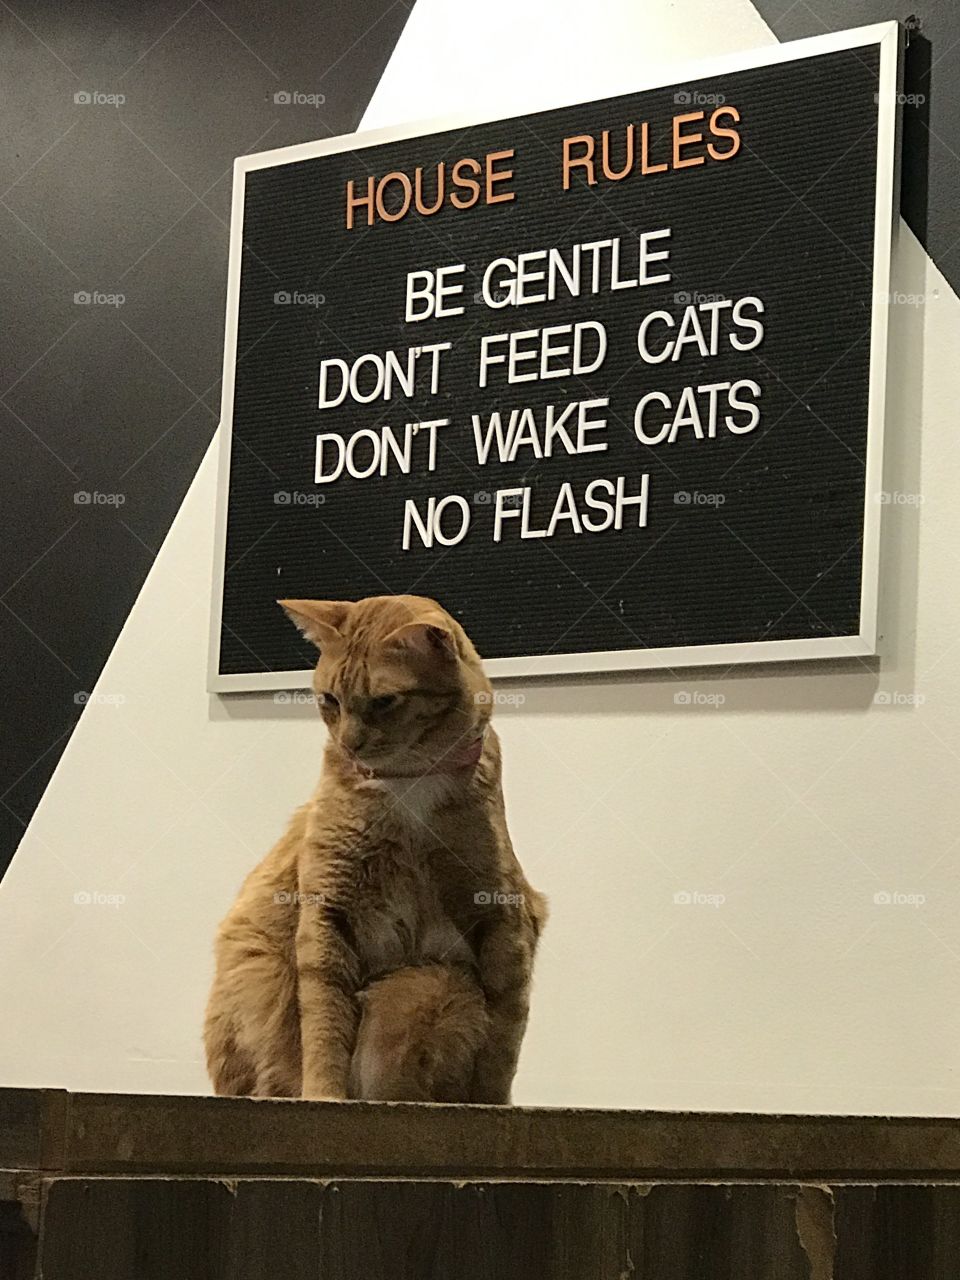 These rules apply to more than just this cat. Let’s keep the flashing to a minimum, shall we?